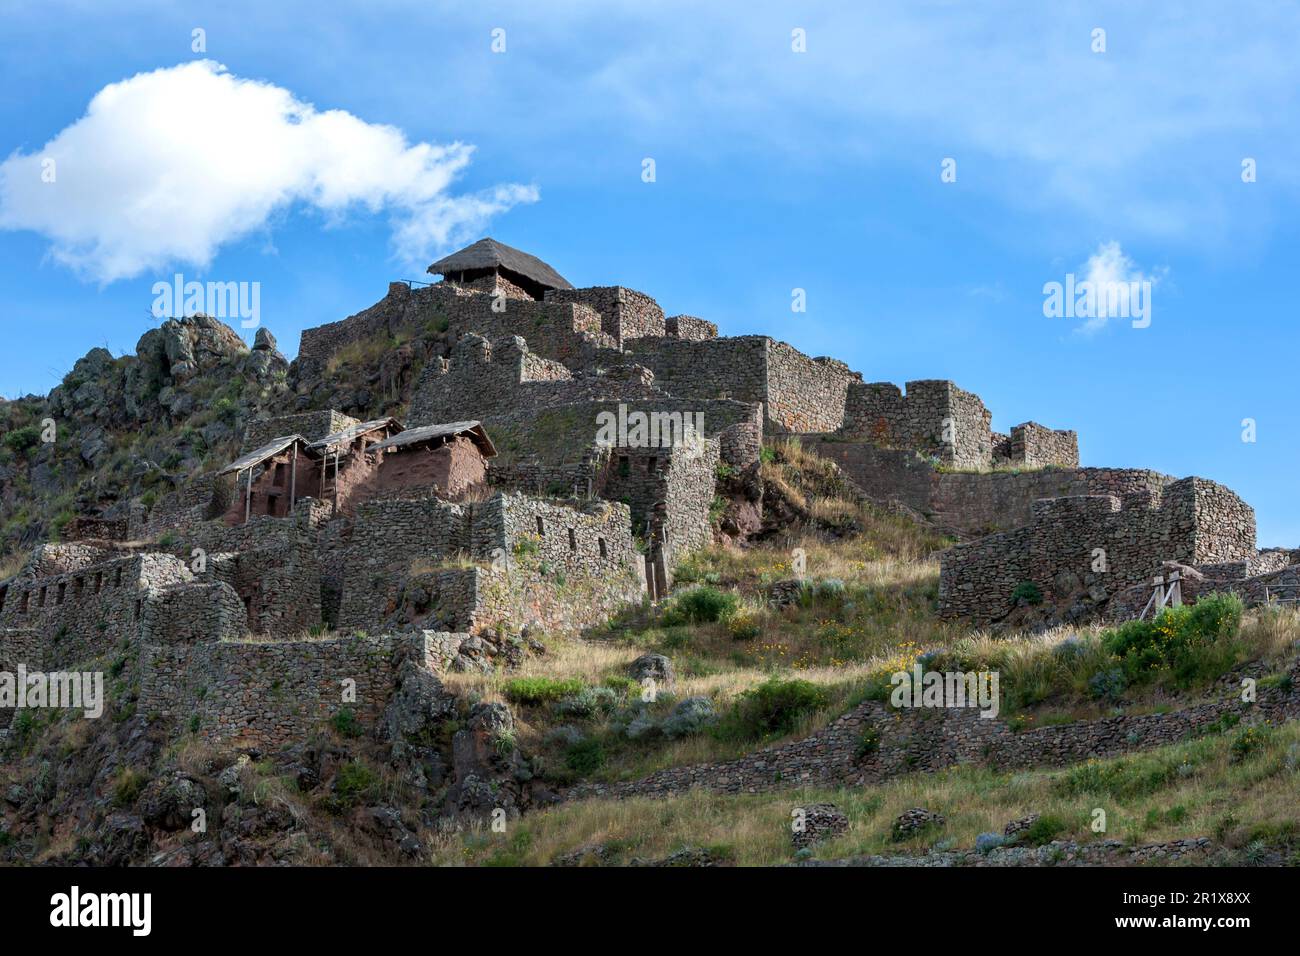 The ancient ruins of Pisac in the Sacred Valley of the Incas in Peru. These Incan ruins, known as Inca Písac, lie atop a steep mountain. Stock Photo